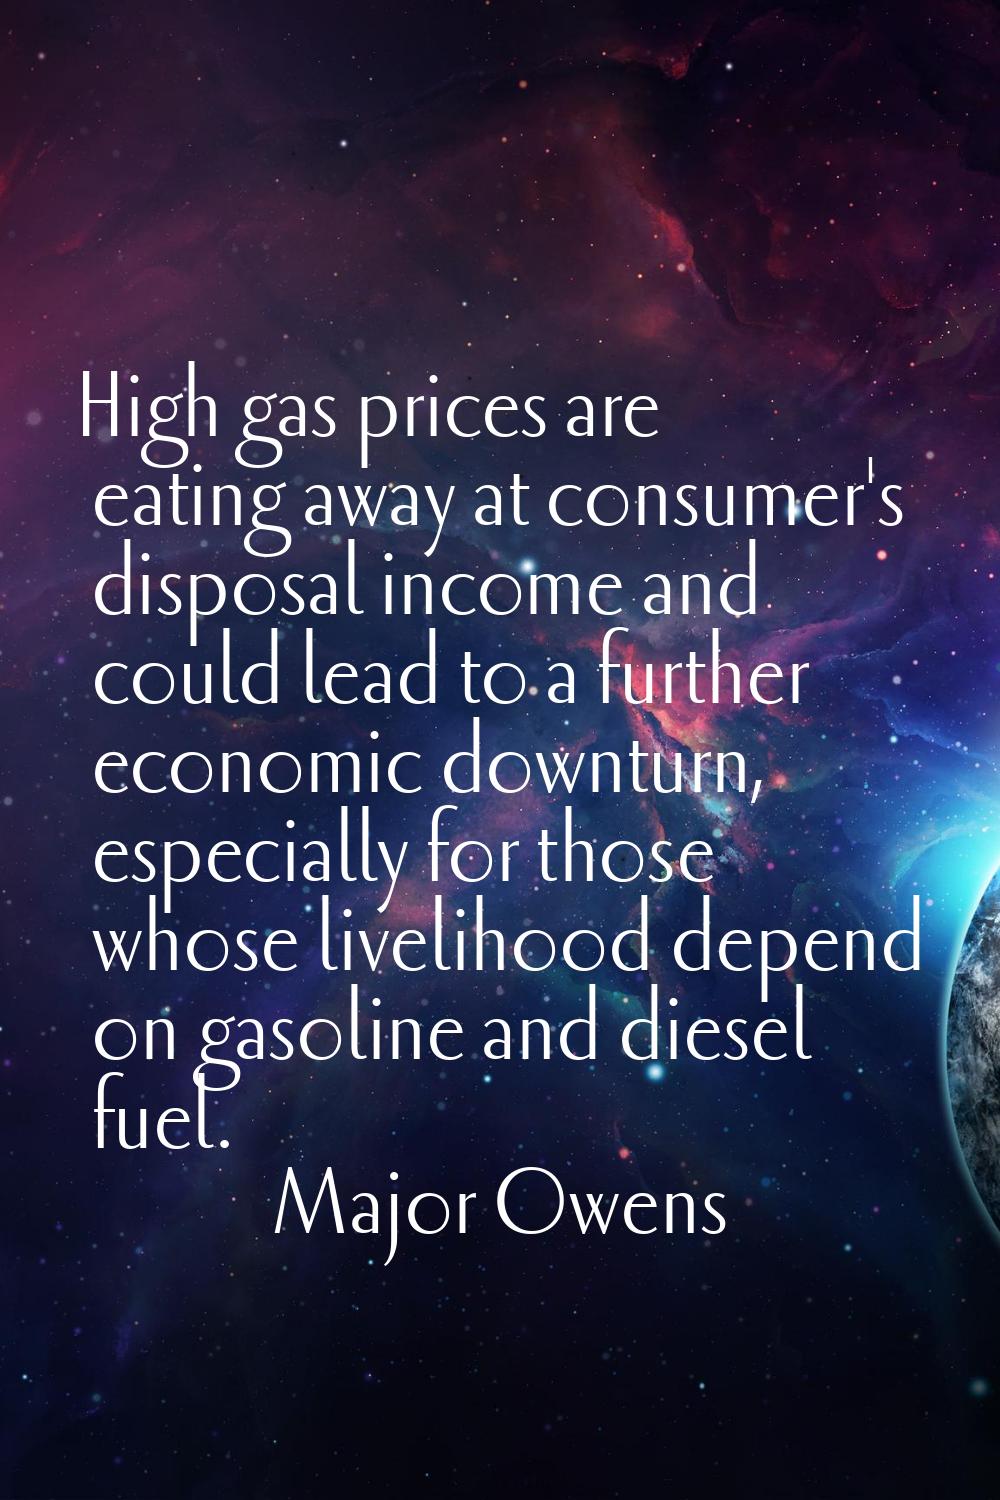 High gas prices are eating away at consumer's disposal income and could lead to a further economic 